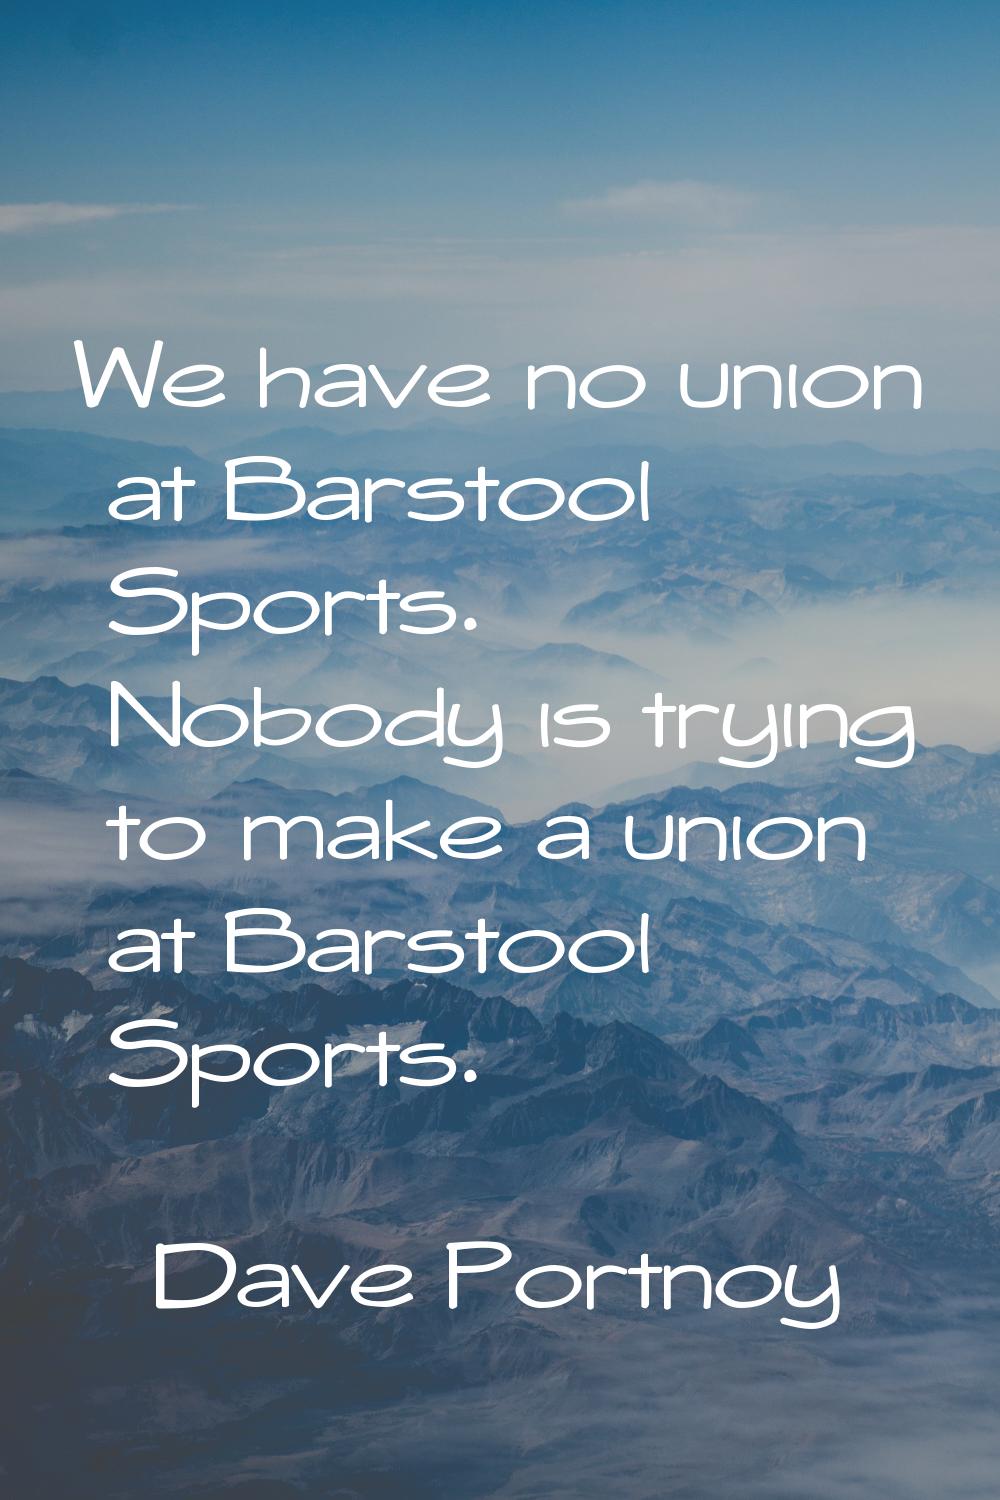 We have no union at Barstool Sports. Nobody is trying to make a union at Barstool Sports.